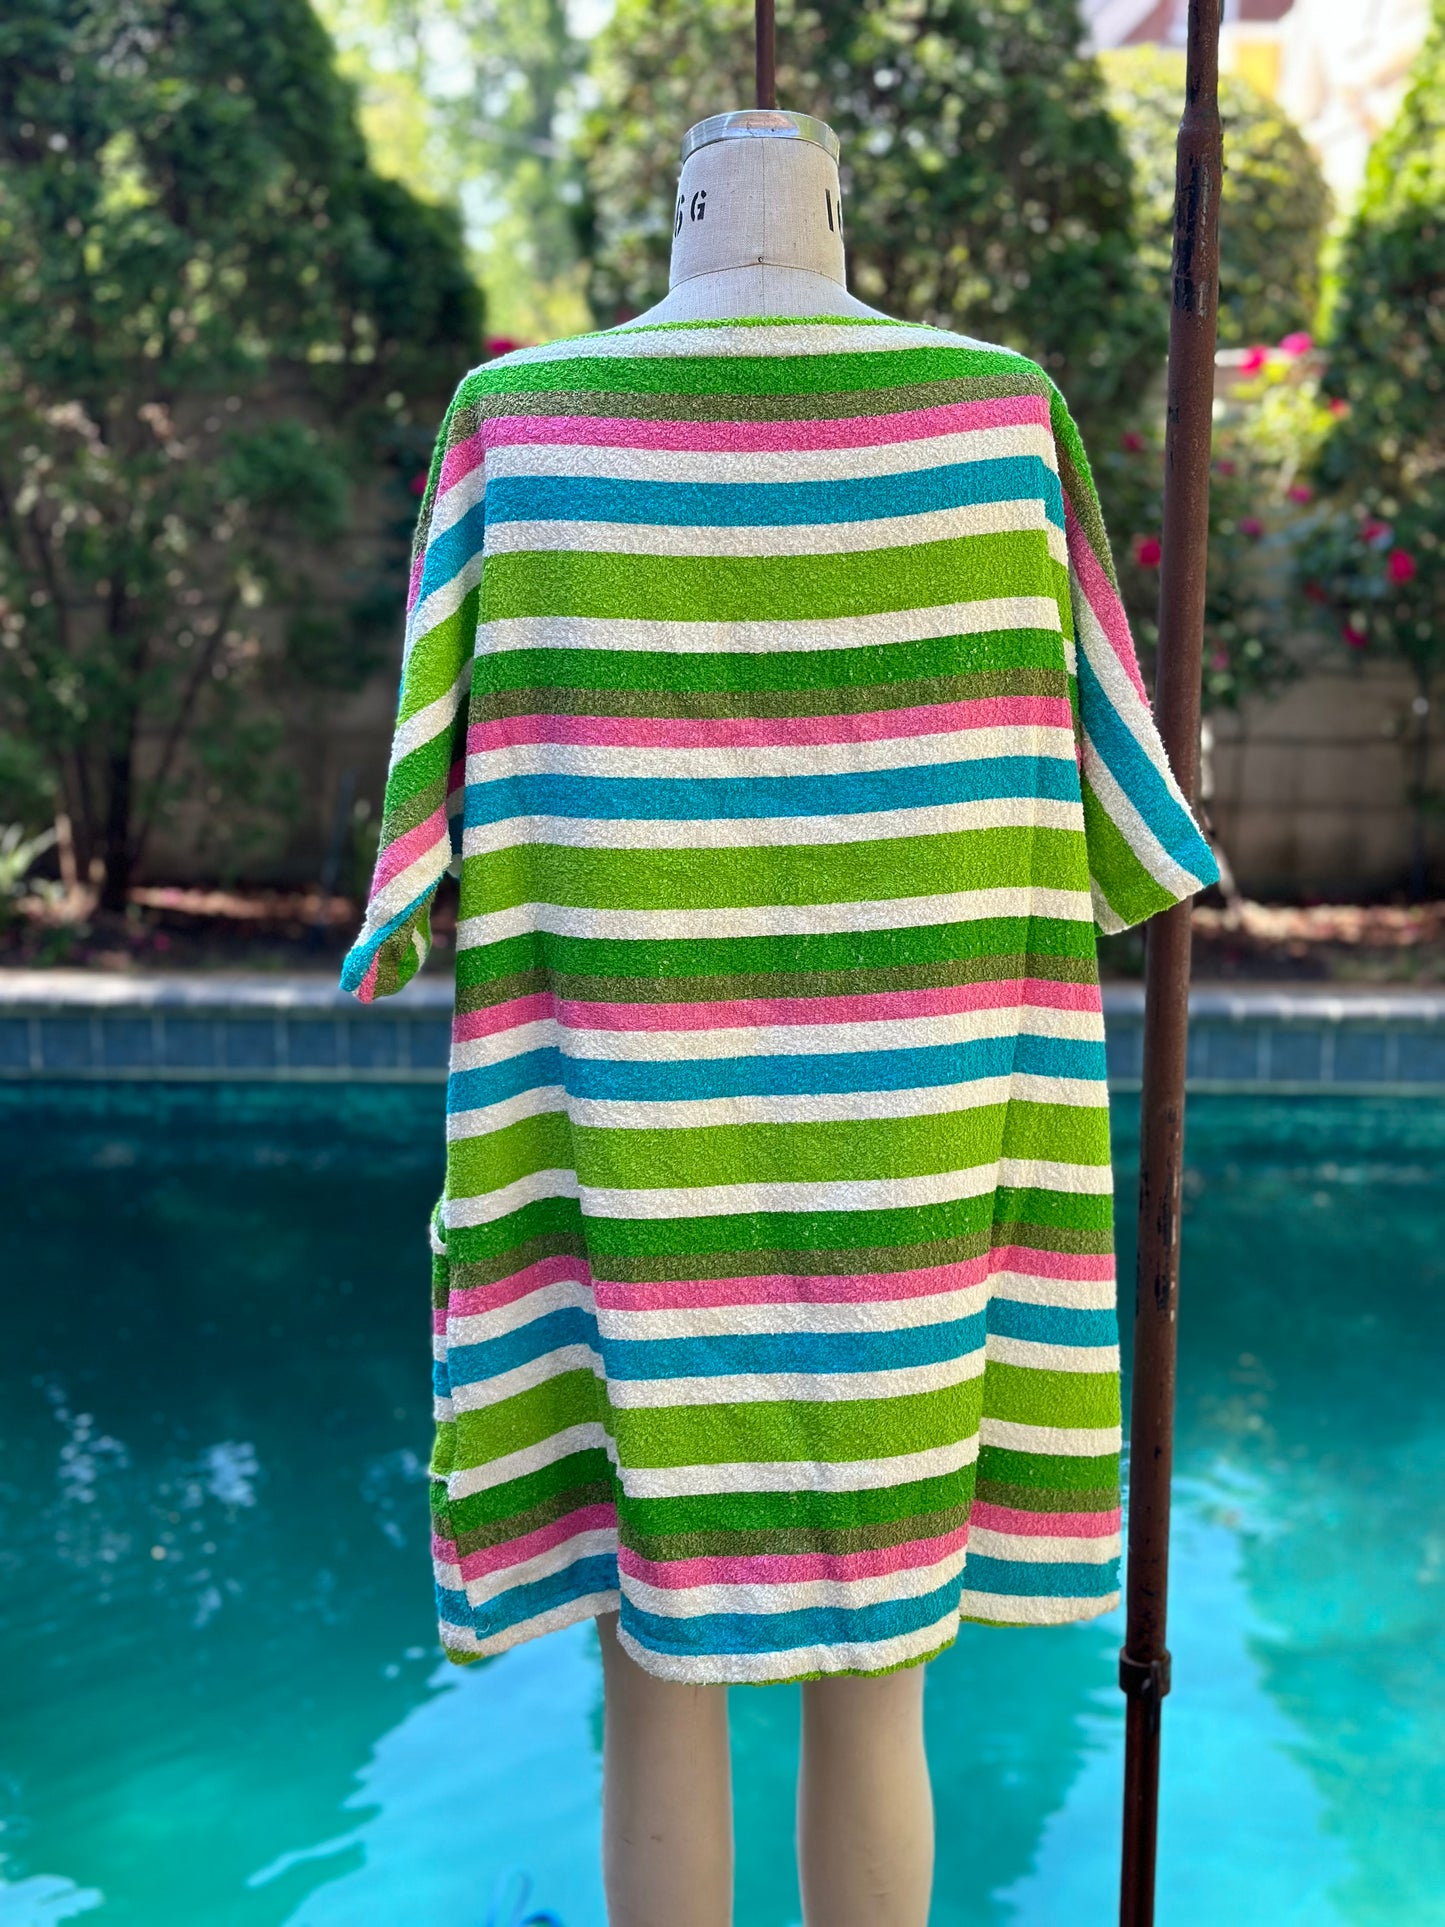 1960s Striped Terry Cloth Beach Dress, Miss Elaine, Swimsuit Cover Up, New with Tag, Goldsmith’s